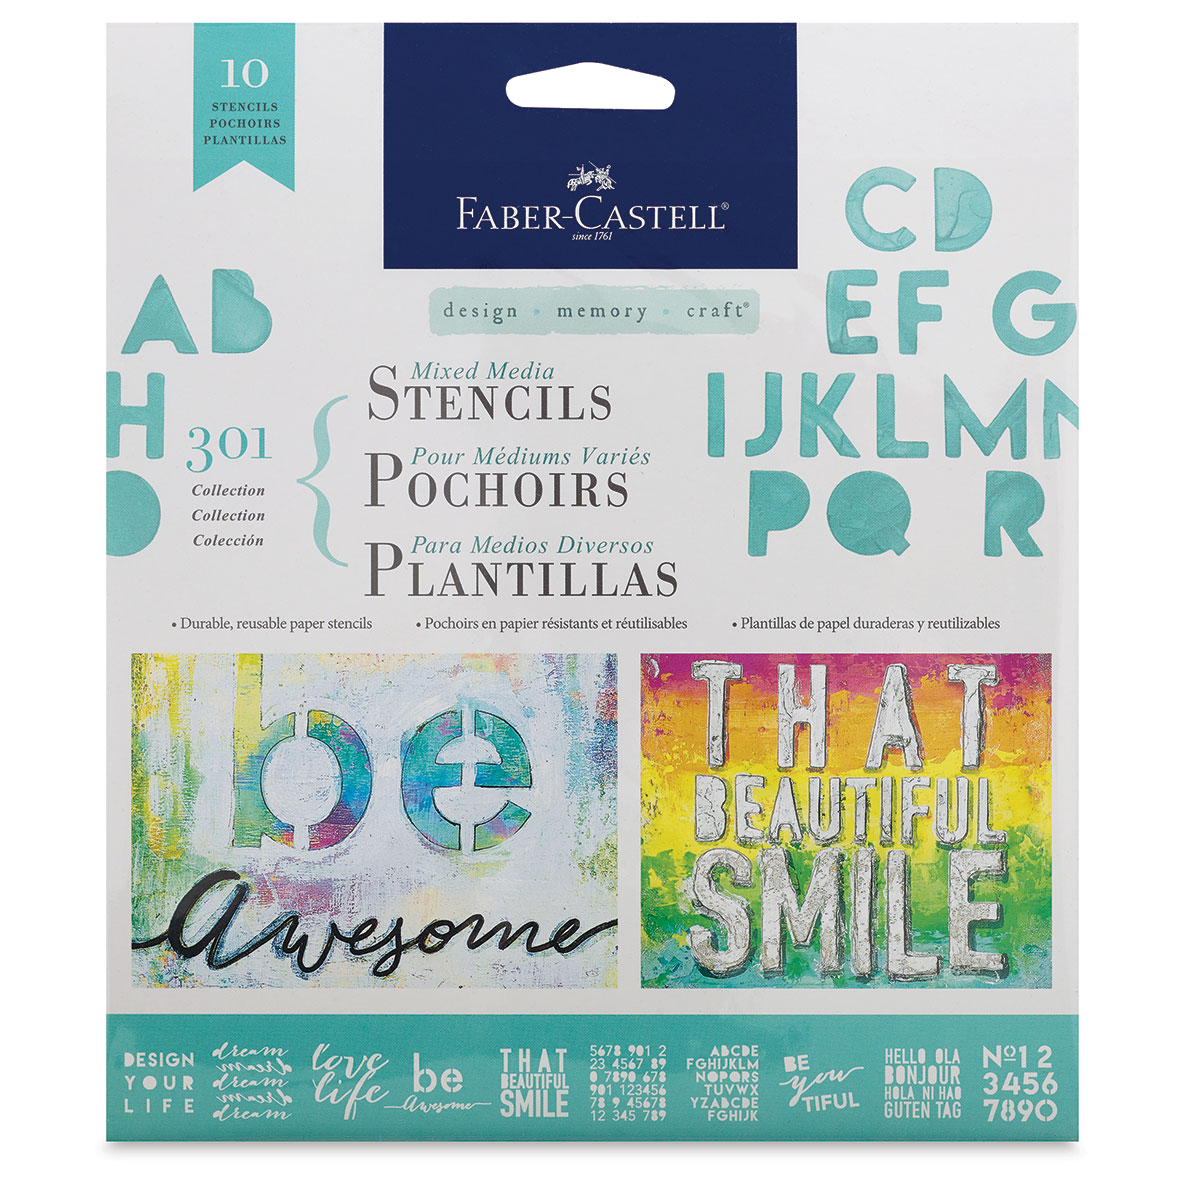 101 Collection 10 Reusable Graphic Stencils Faber-Castell Mixed Media Paper Stencils 